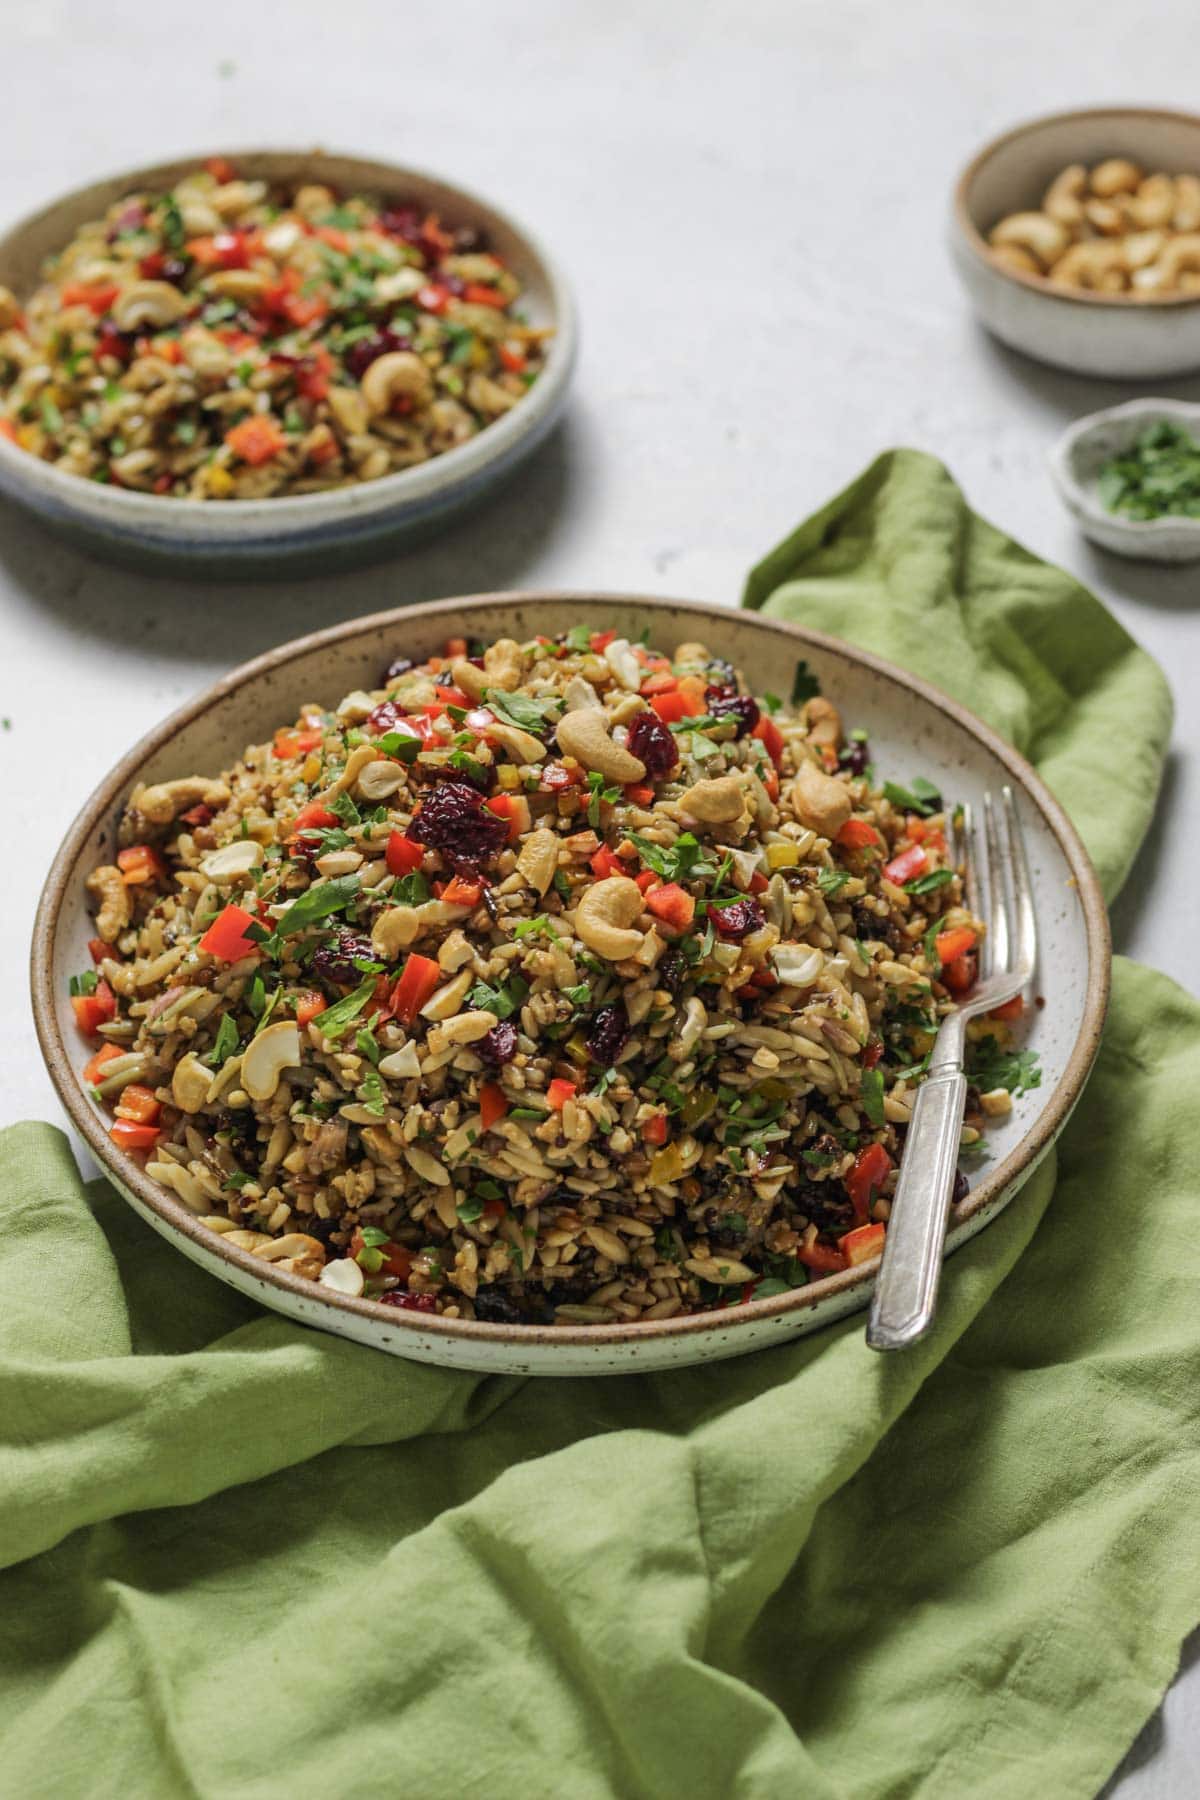 Orzo and wild rice salad in bowls with a linen napkin